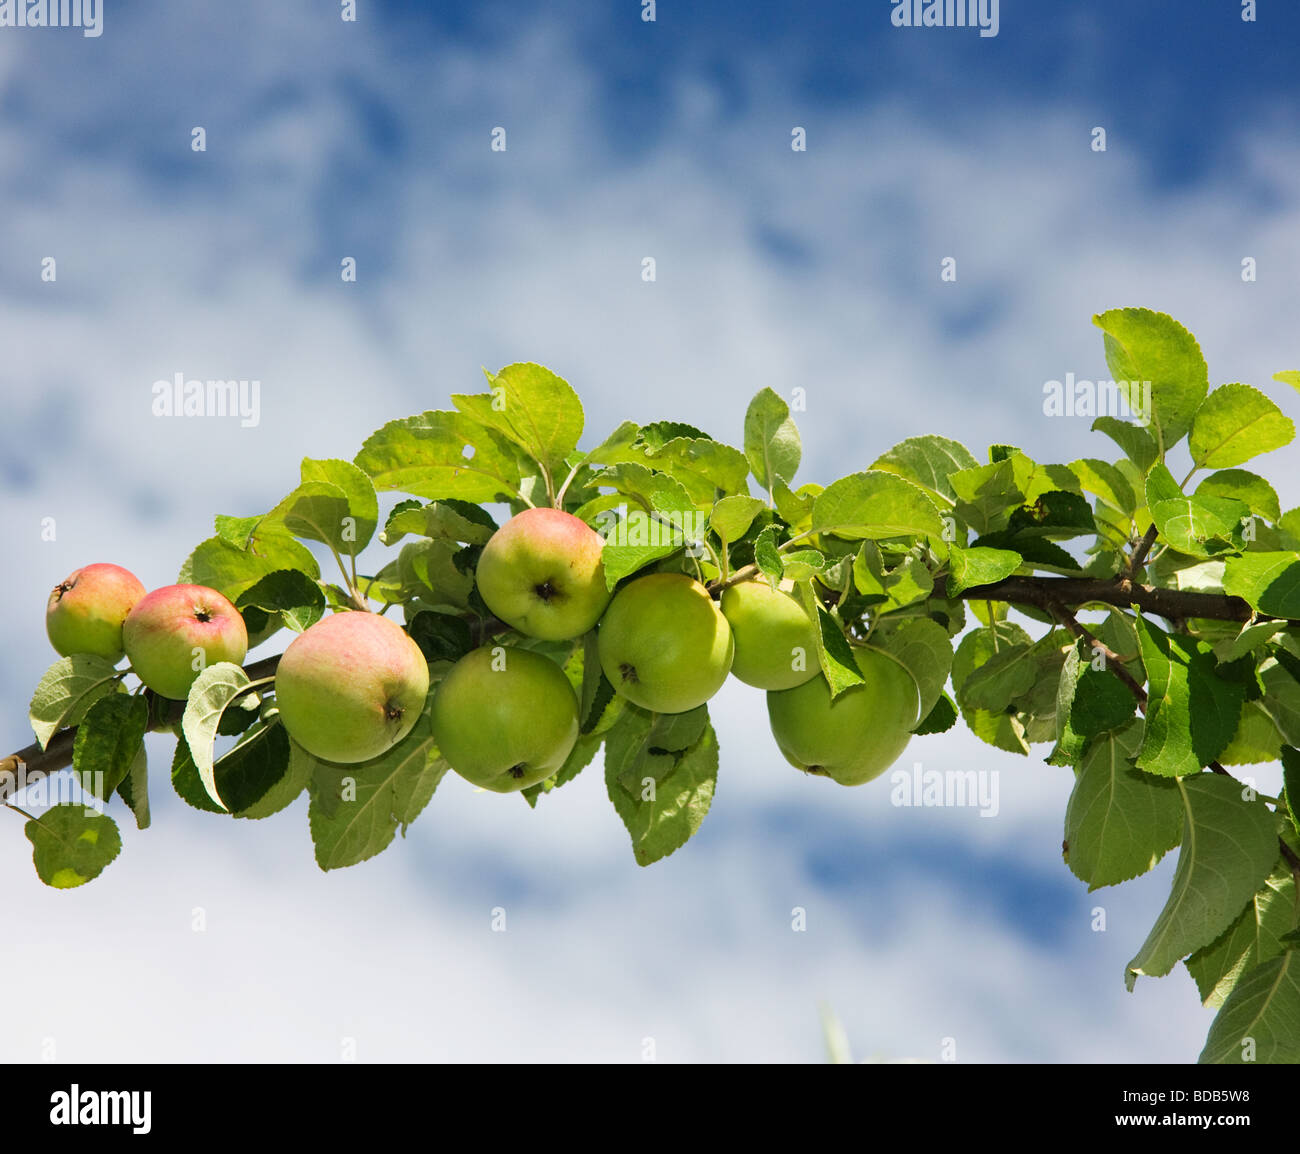 branch of apples Stock Photo